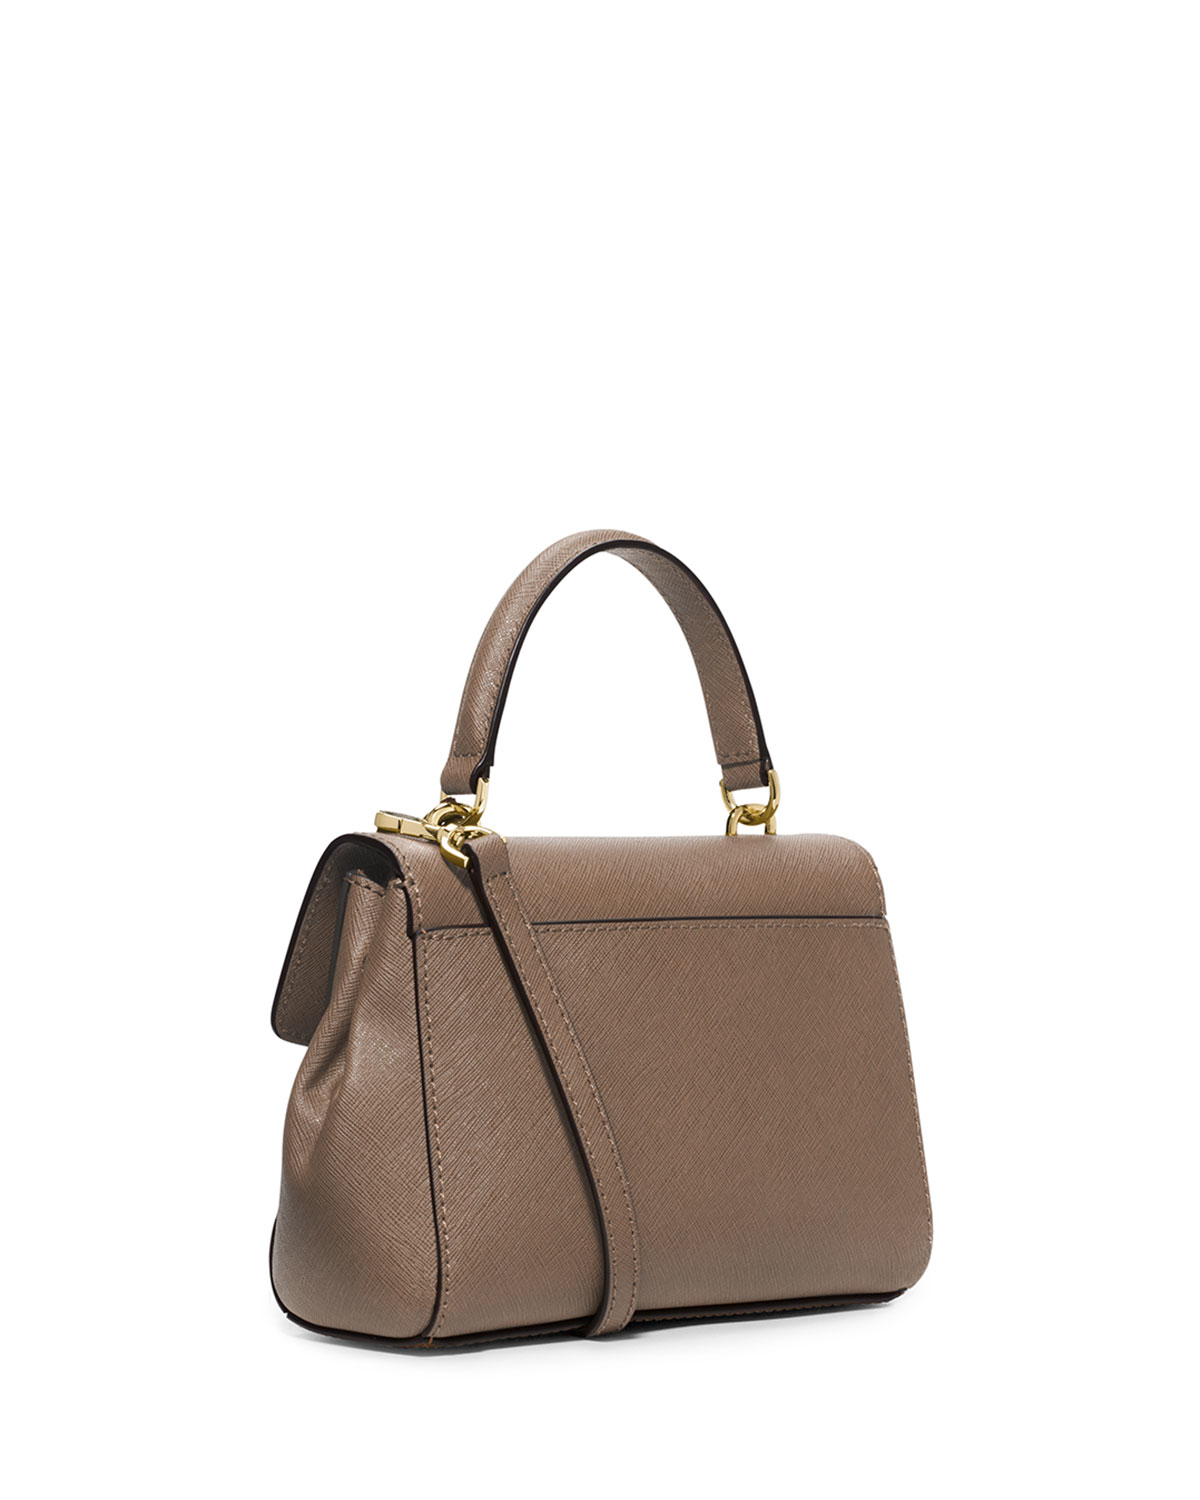 MICHAEL Michael Kors Ava Extra-Small Cross-Body Bag in Brown - Lyst